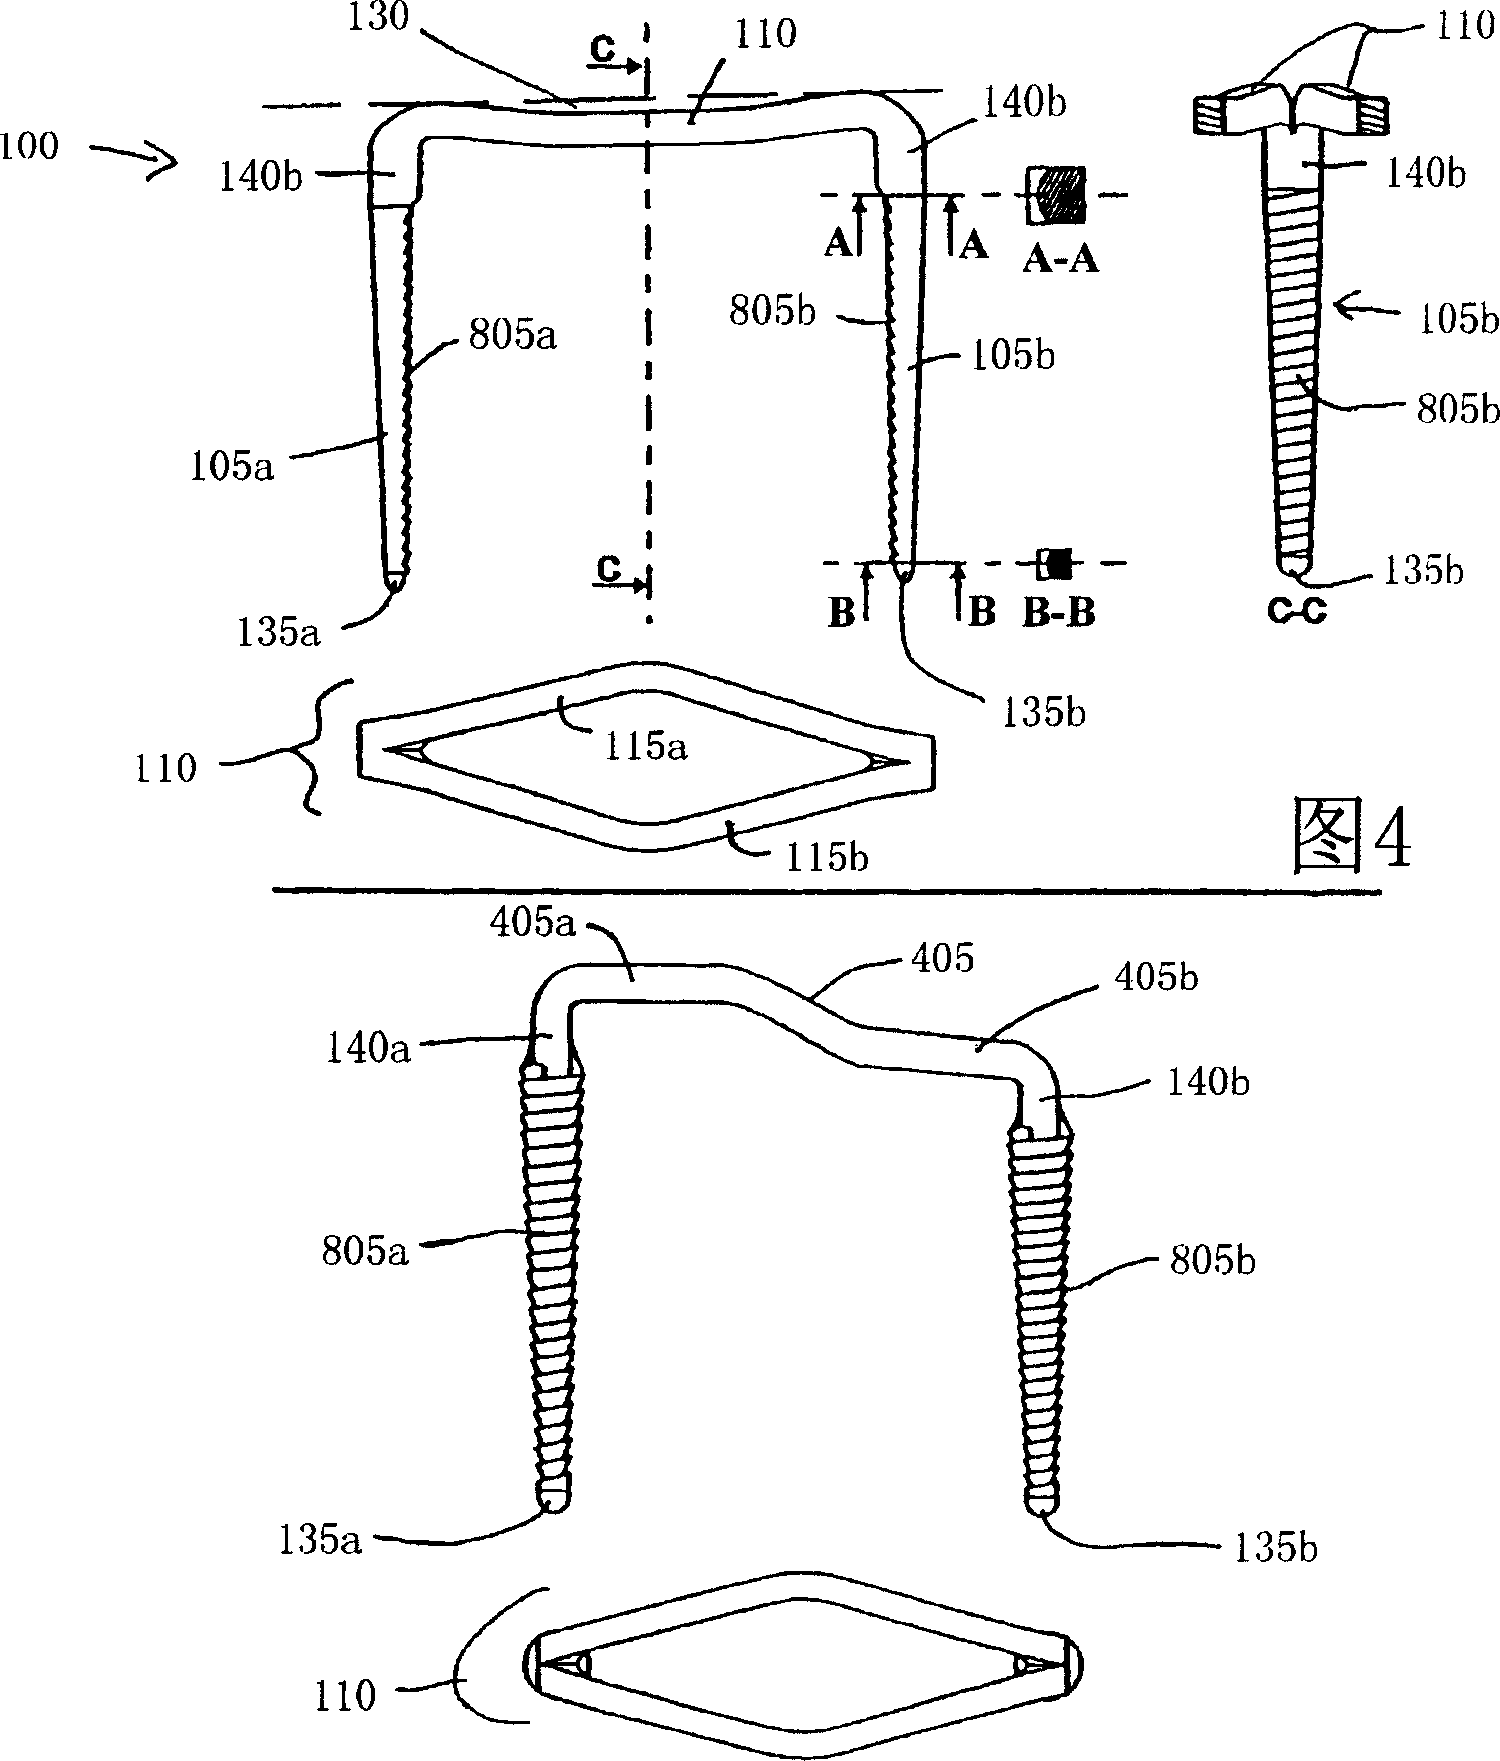 Osteosynthesis clip and insertion tool for inserting an osteosynthesis clip into bone tissue fragments